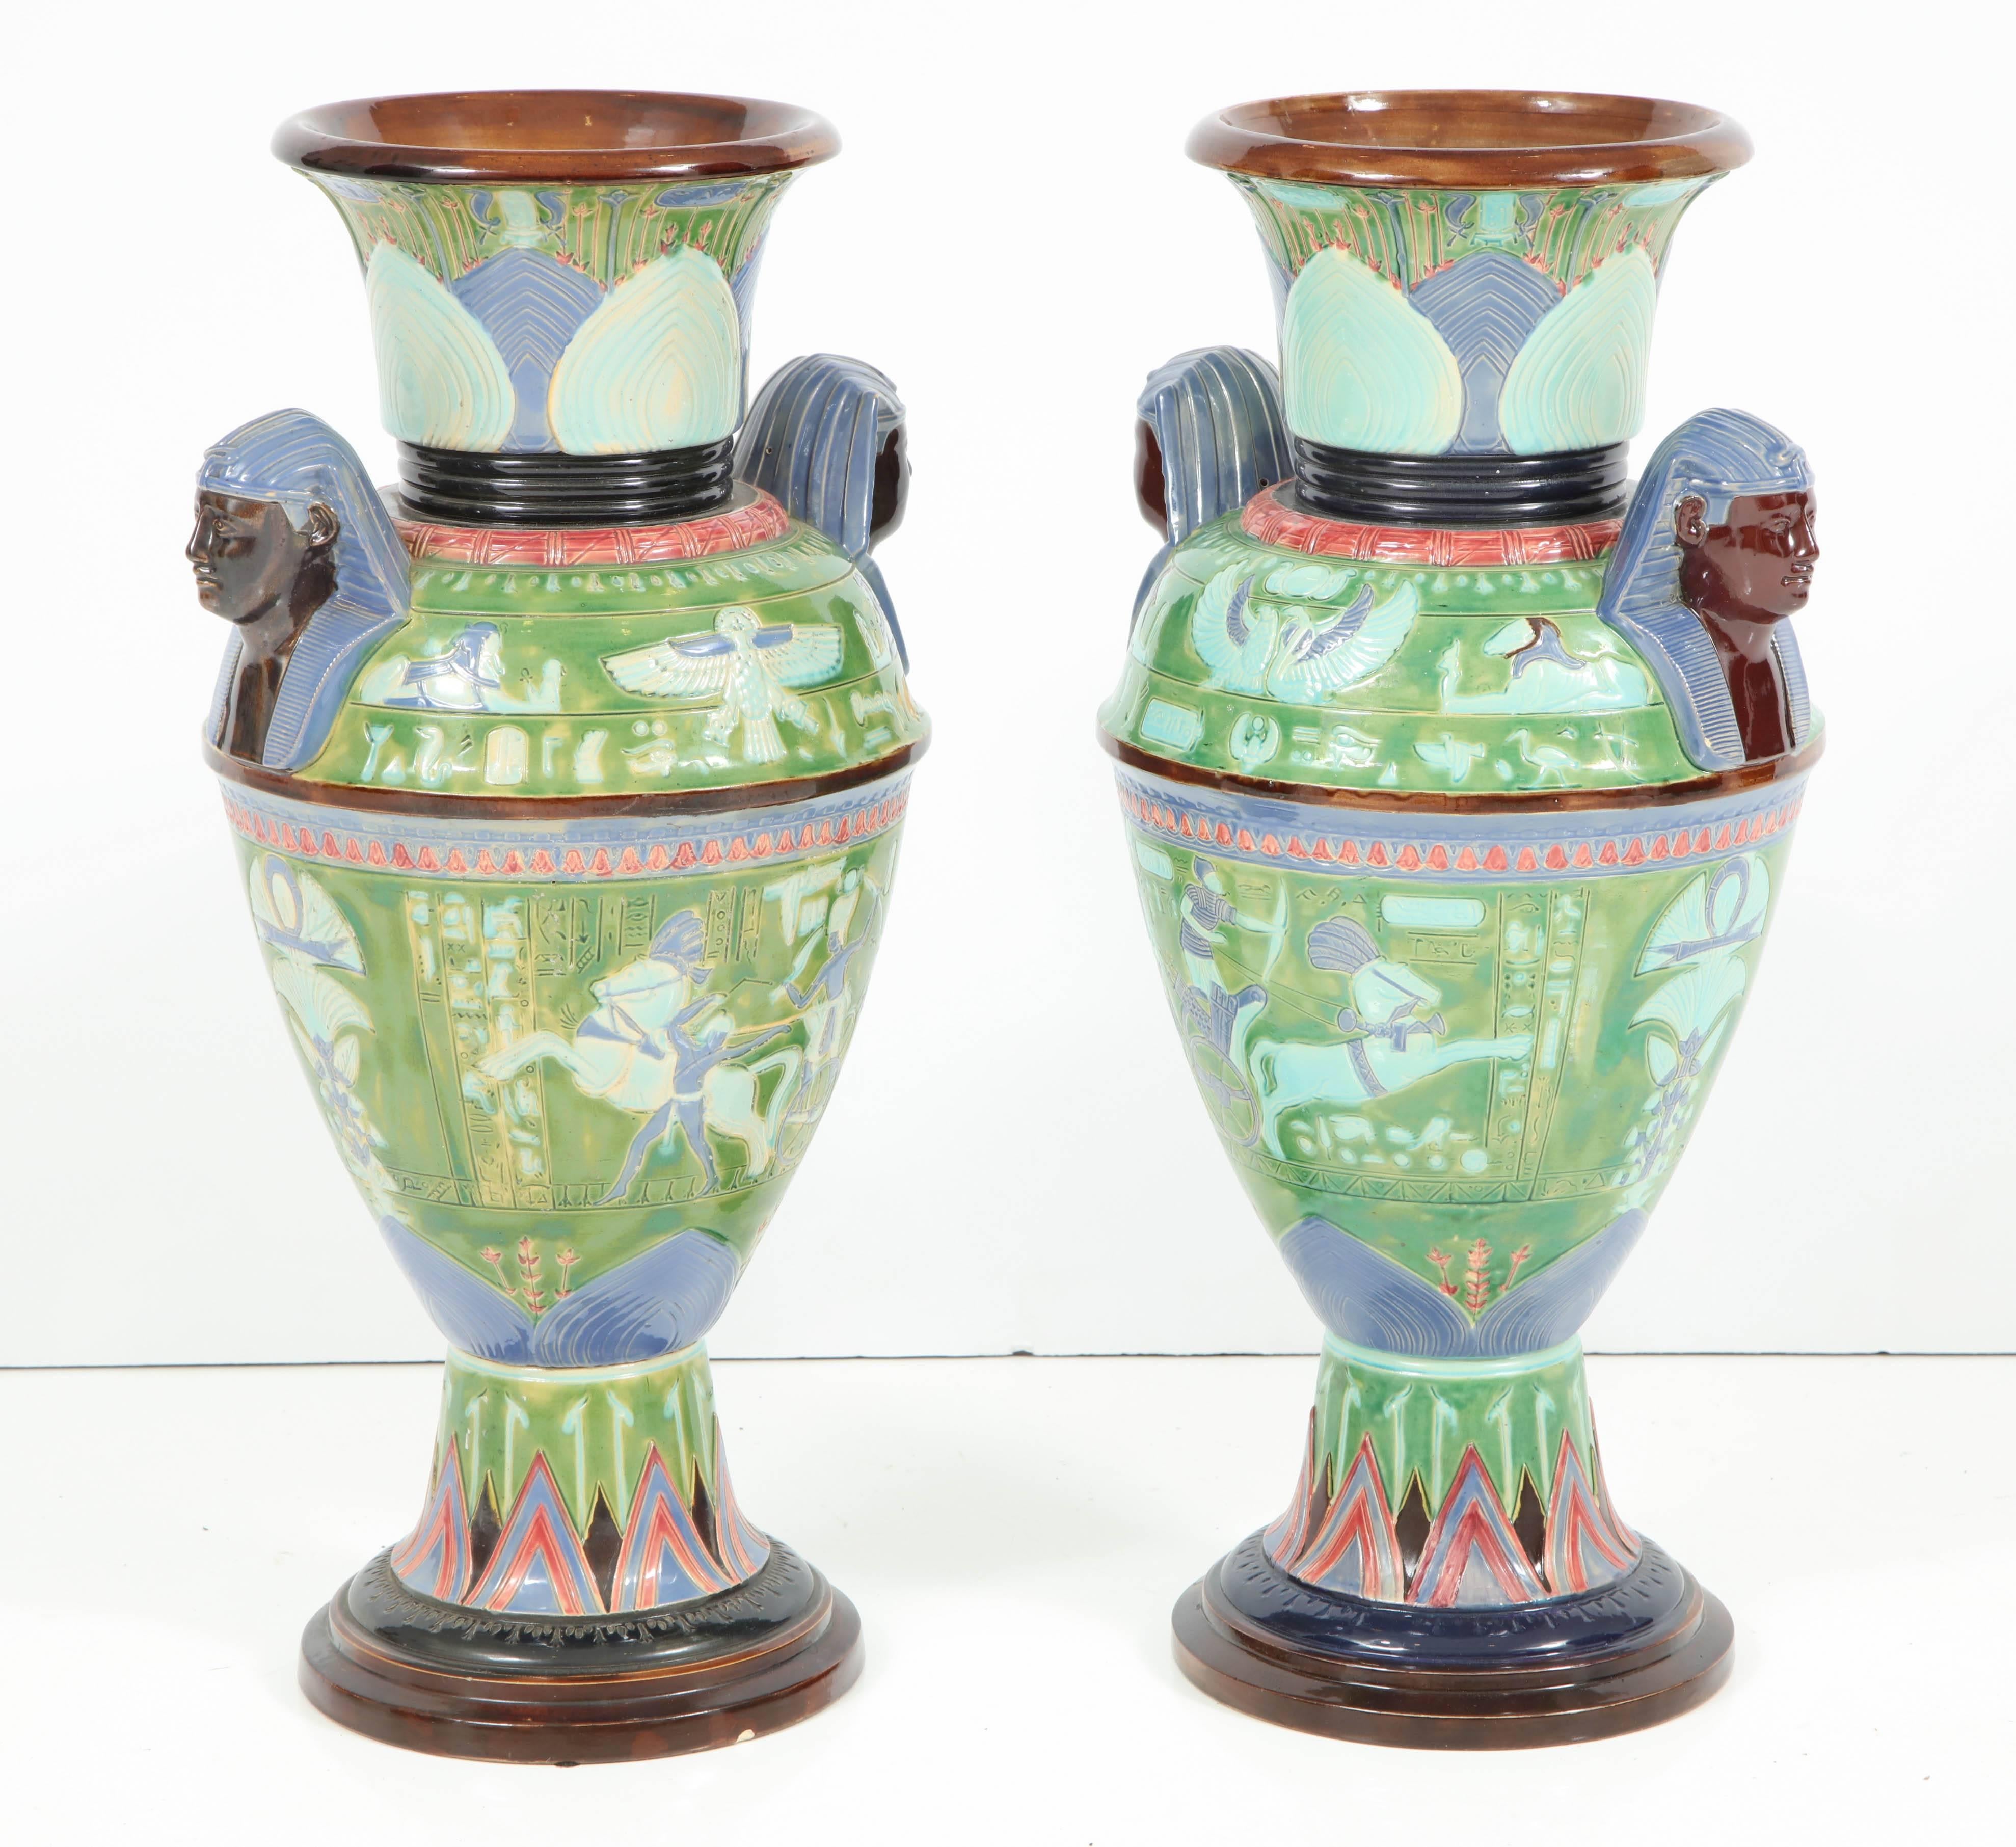 These vases are noteworthy for their form, detailing and spectacular color. With an urn shape, each vase depicts a battle scene on lower portion and images of deities and other Egyptian motifs on upper portion, with two pharaohs flanking the sides.